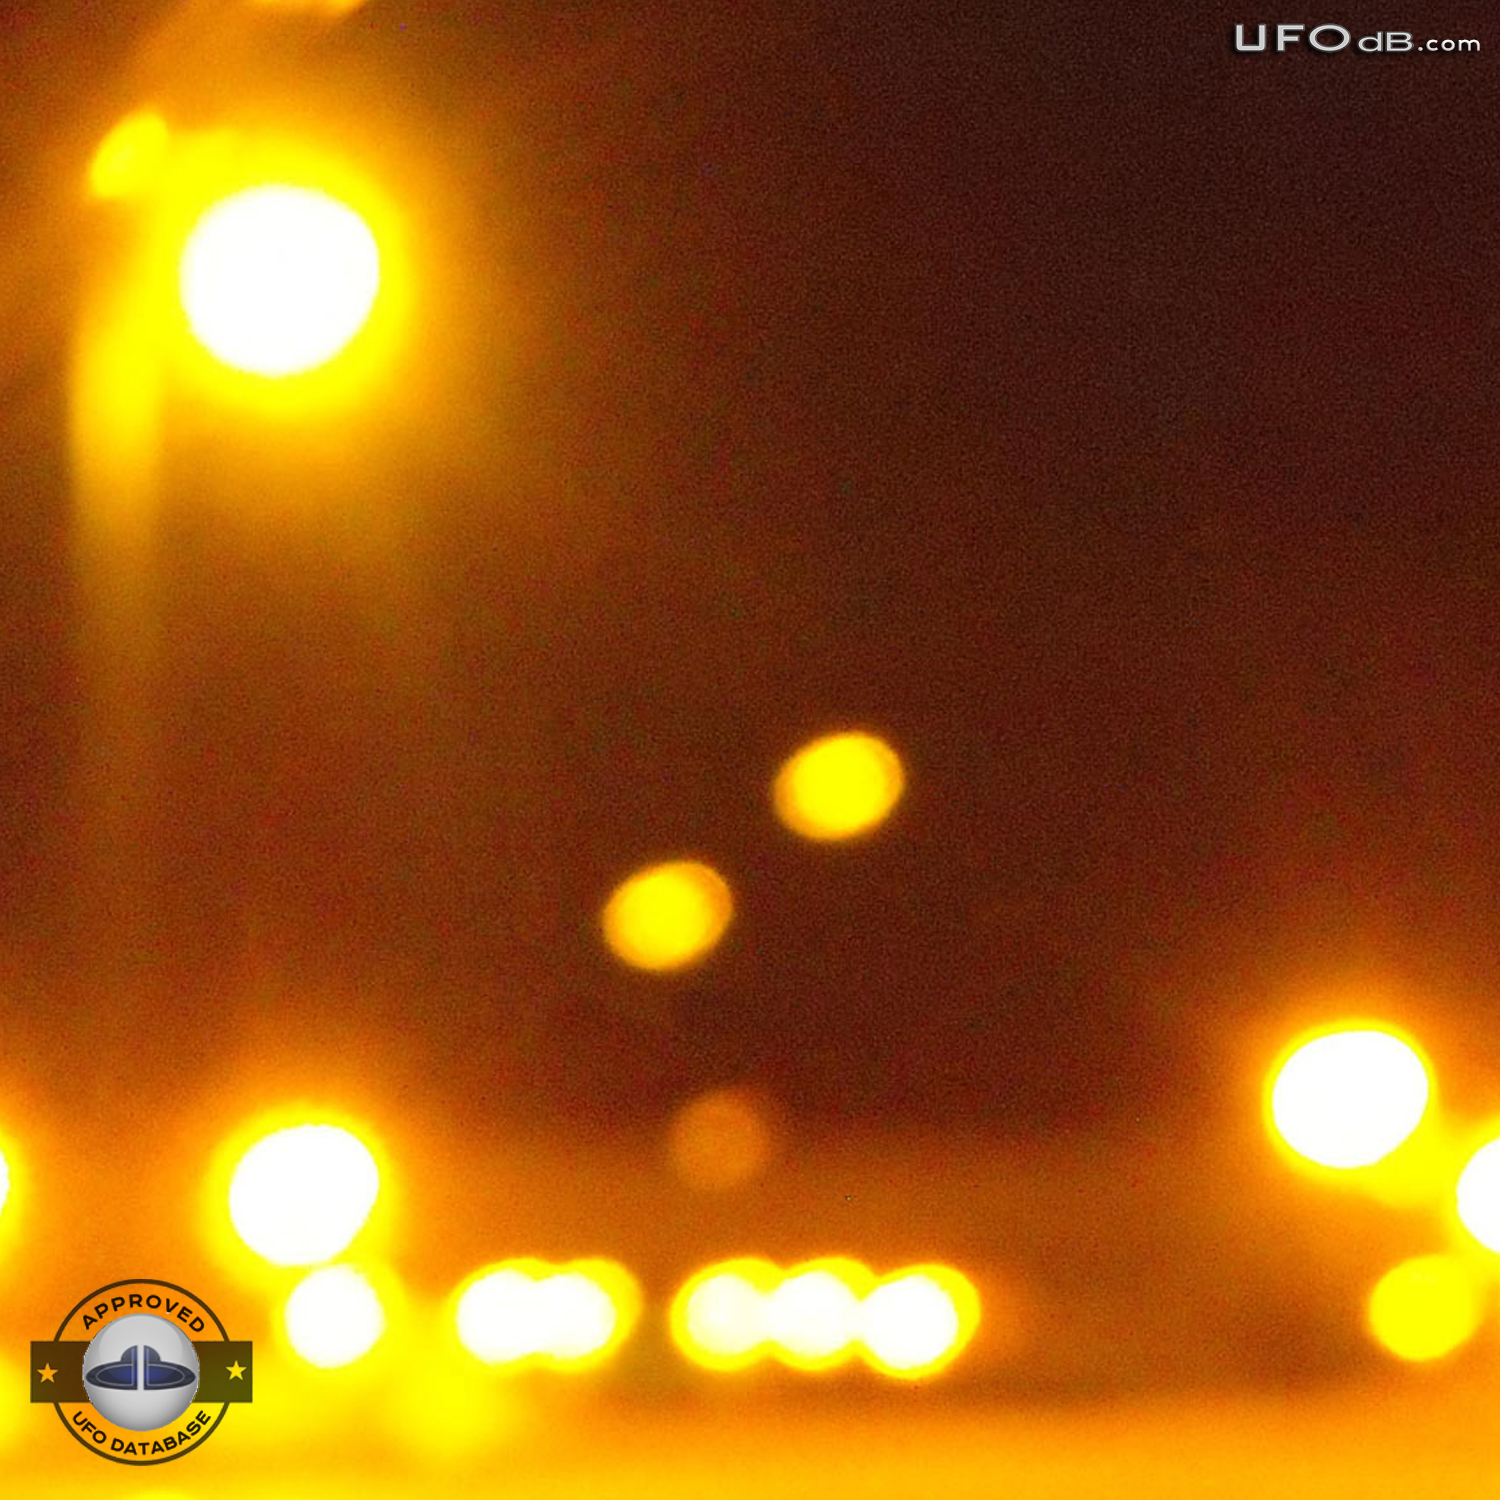 Pulsating Orange UFOs near Fort Carson Army Base | USA | May 12 2011 UFO Picture #310-2